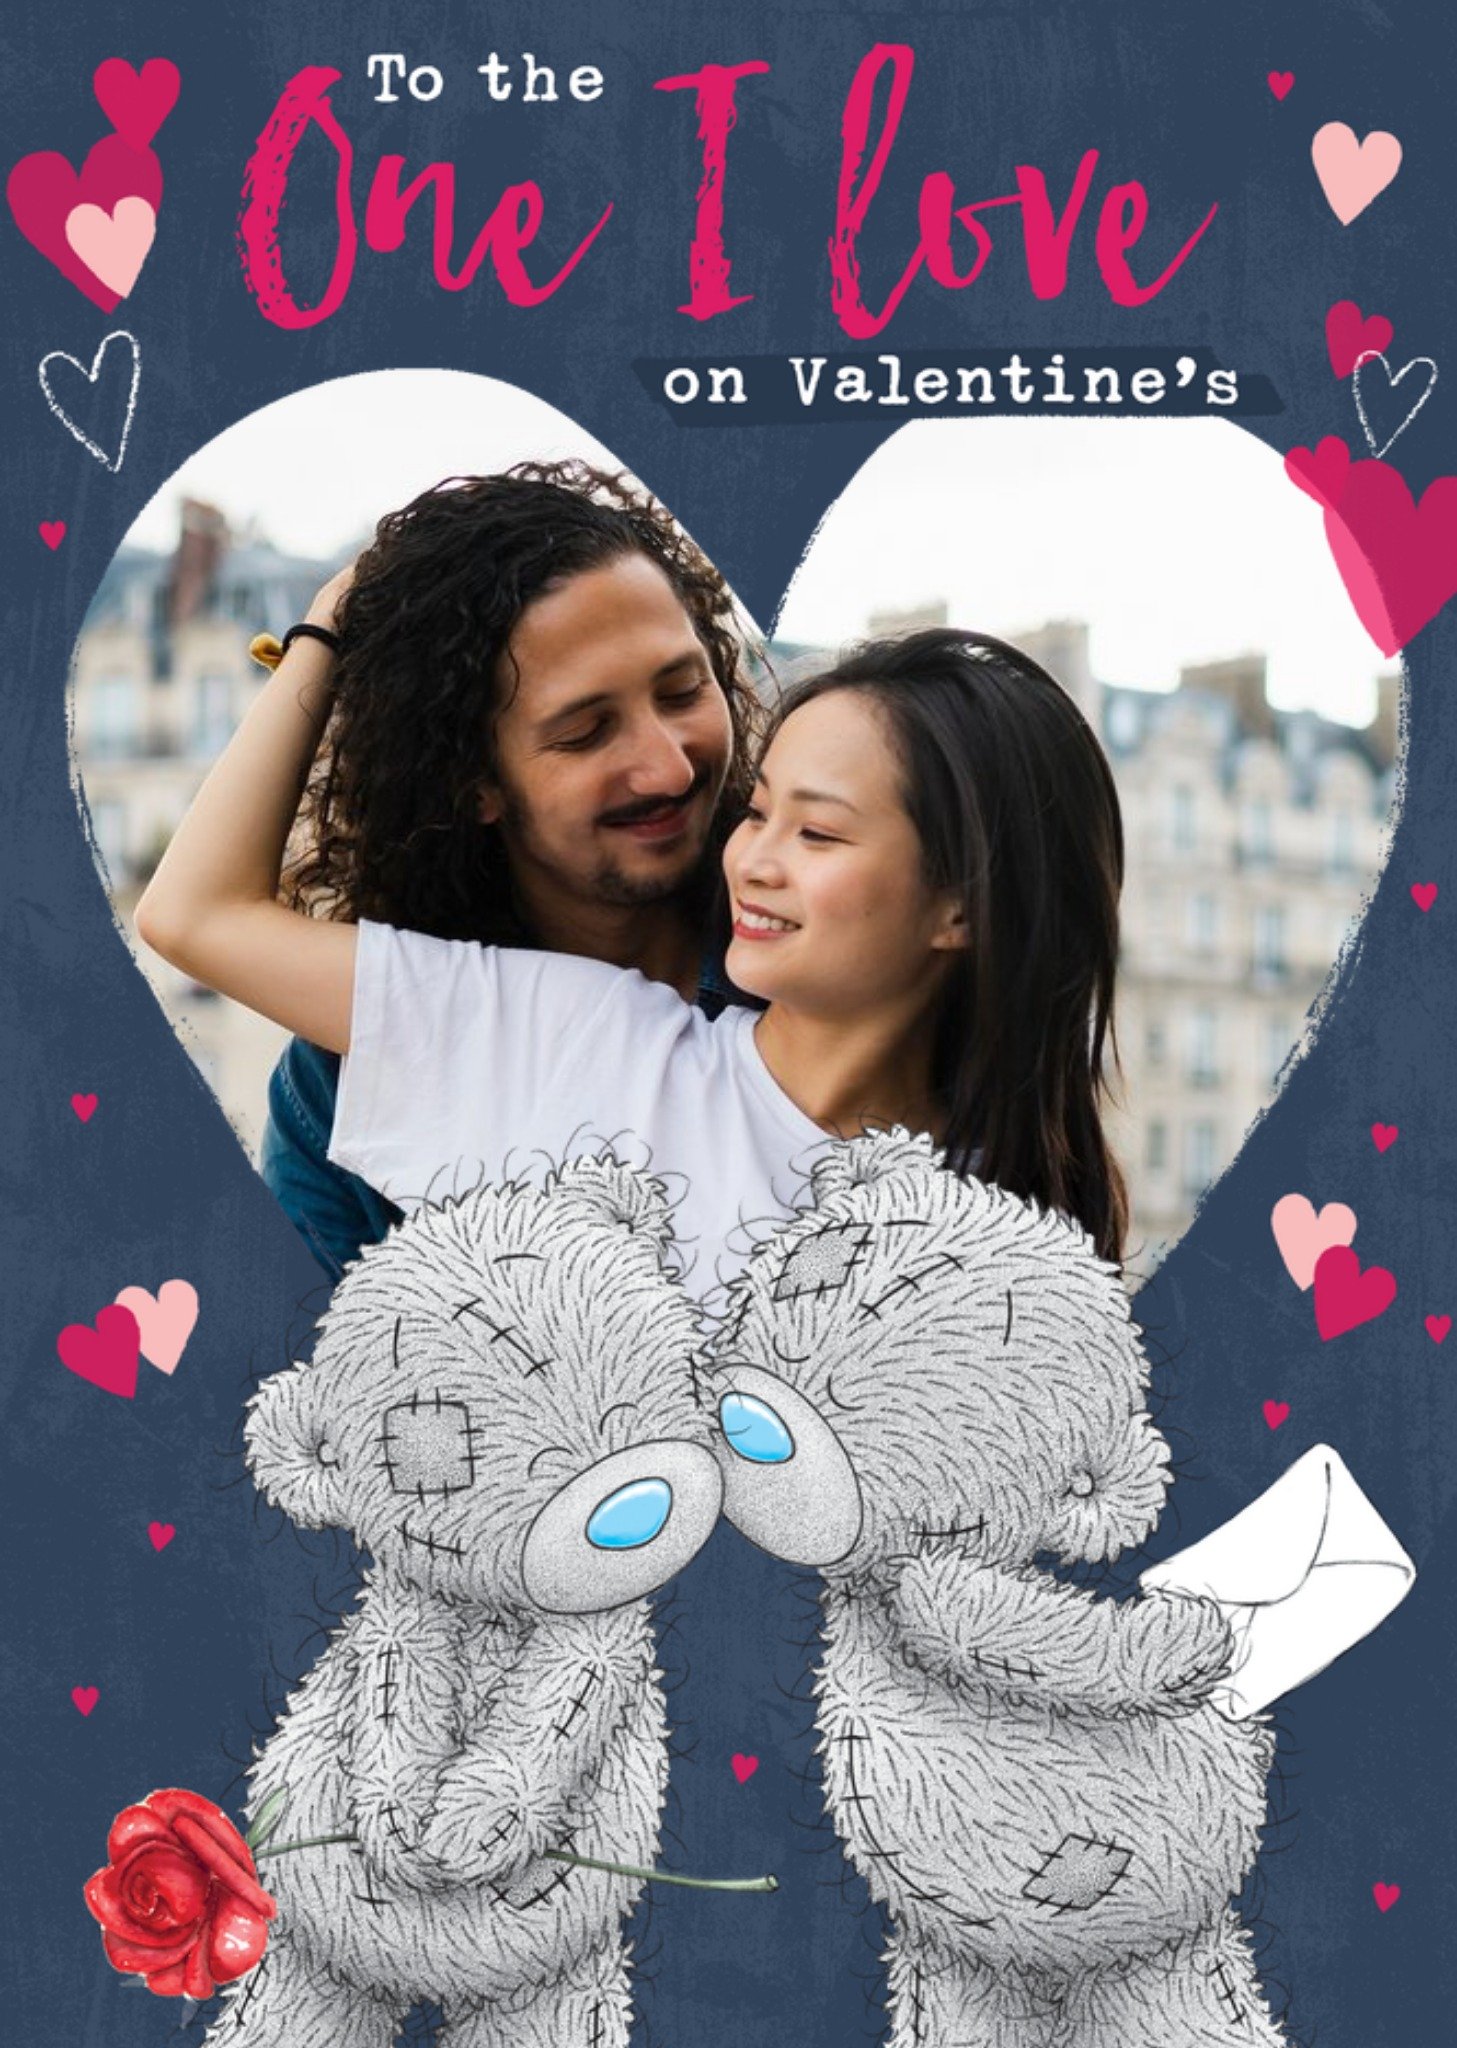 Me To You Tatty Teddy One I Love Heart Photo Upload Valentine's Card, Large